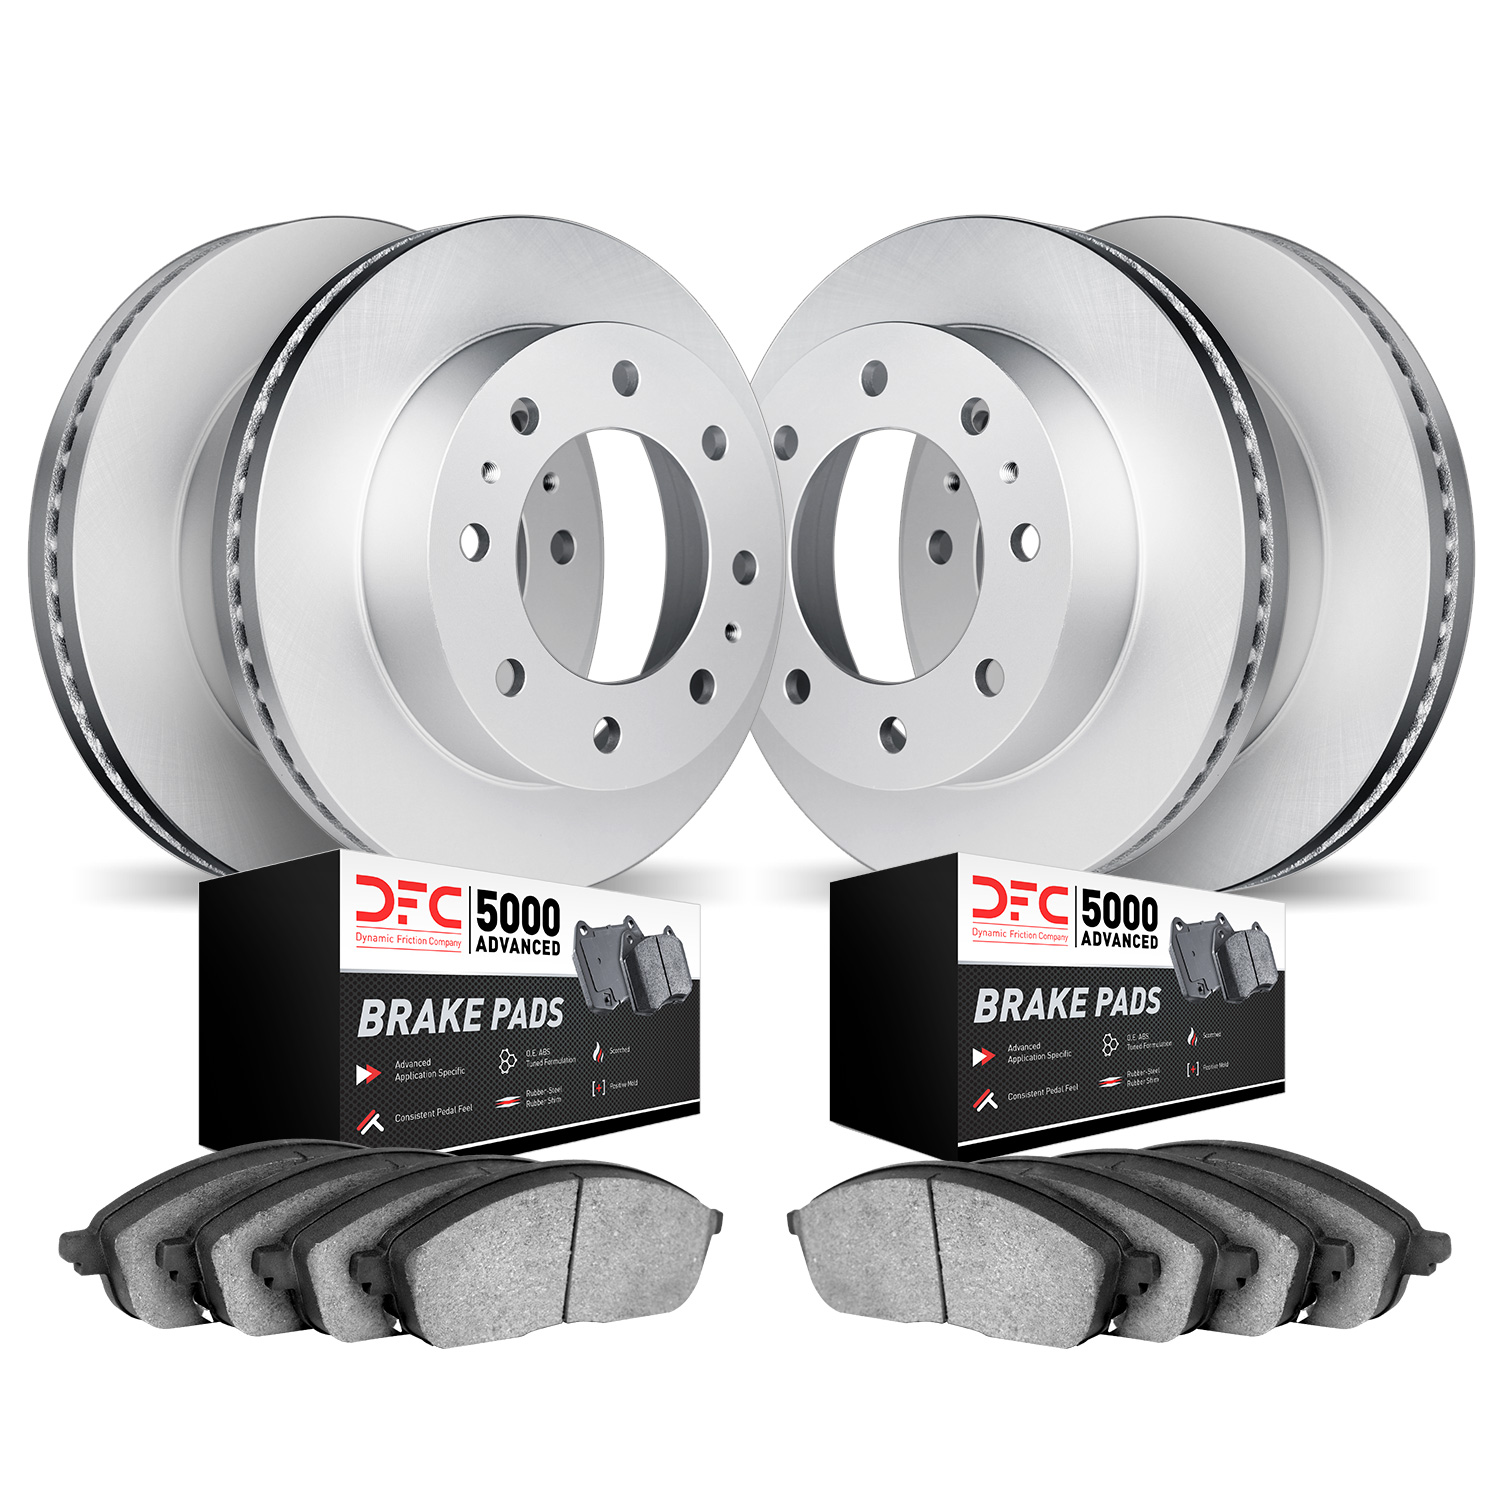 4504-54068 Geospec Brake Rotors w/5000 Advanced Brake Pads Kit, Fits Select Ford/Lincoln/Mercury/Mazda, Position: Front and Rear